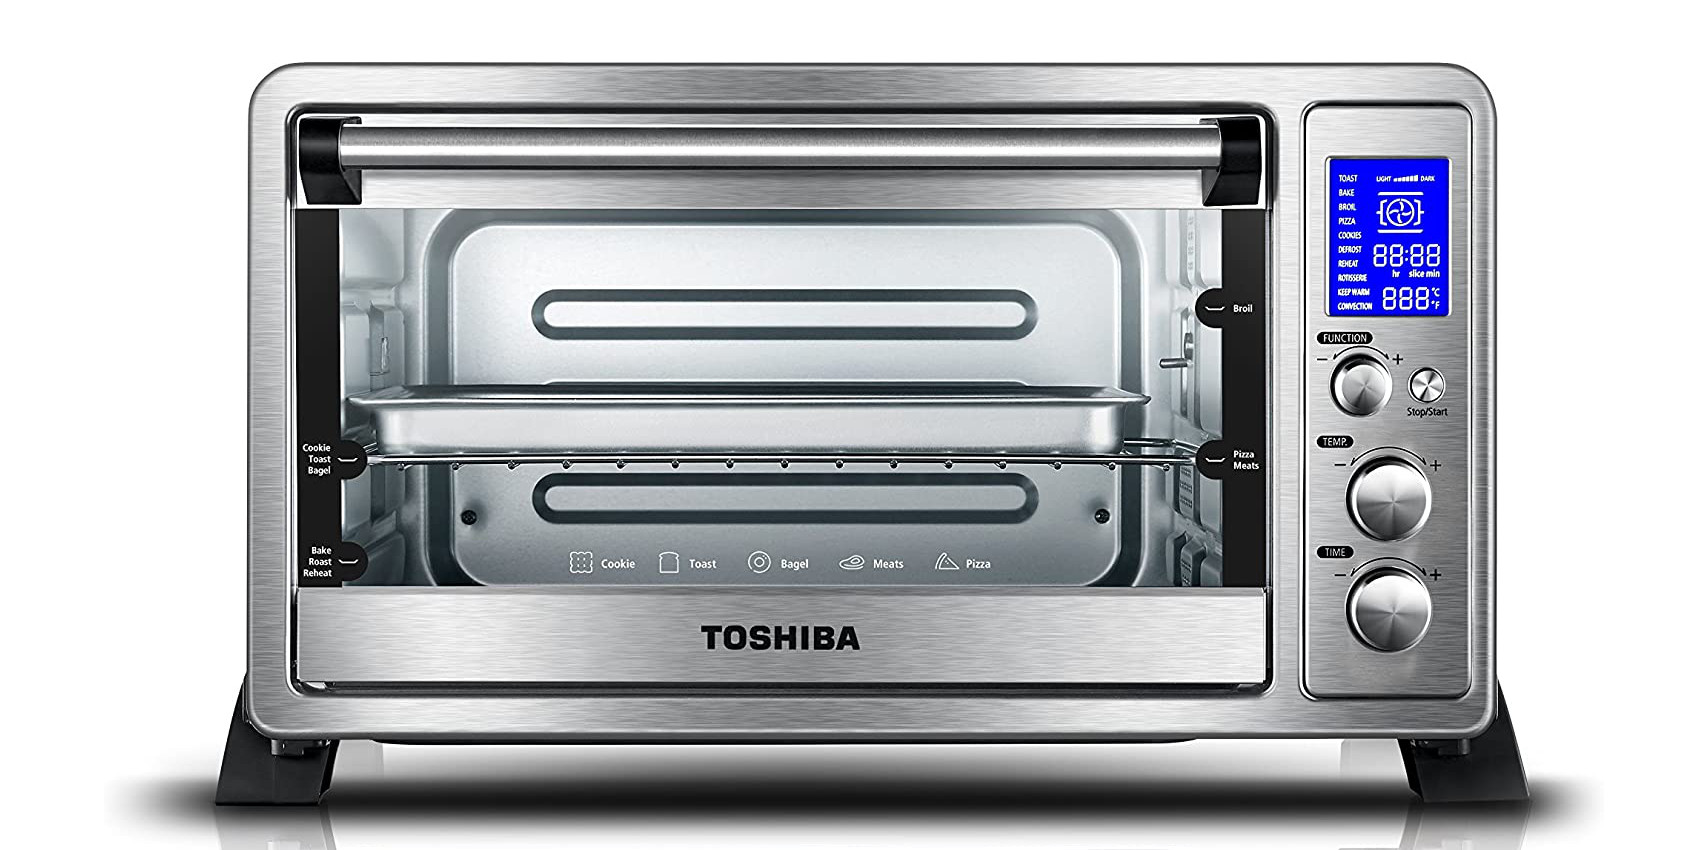 Toshiba stainless steel convection toaster oven hits Amazon low at $66